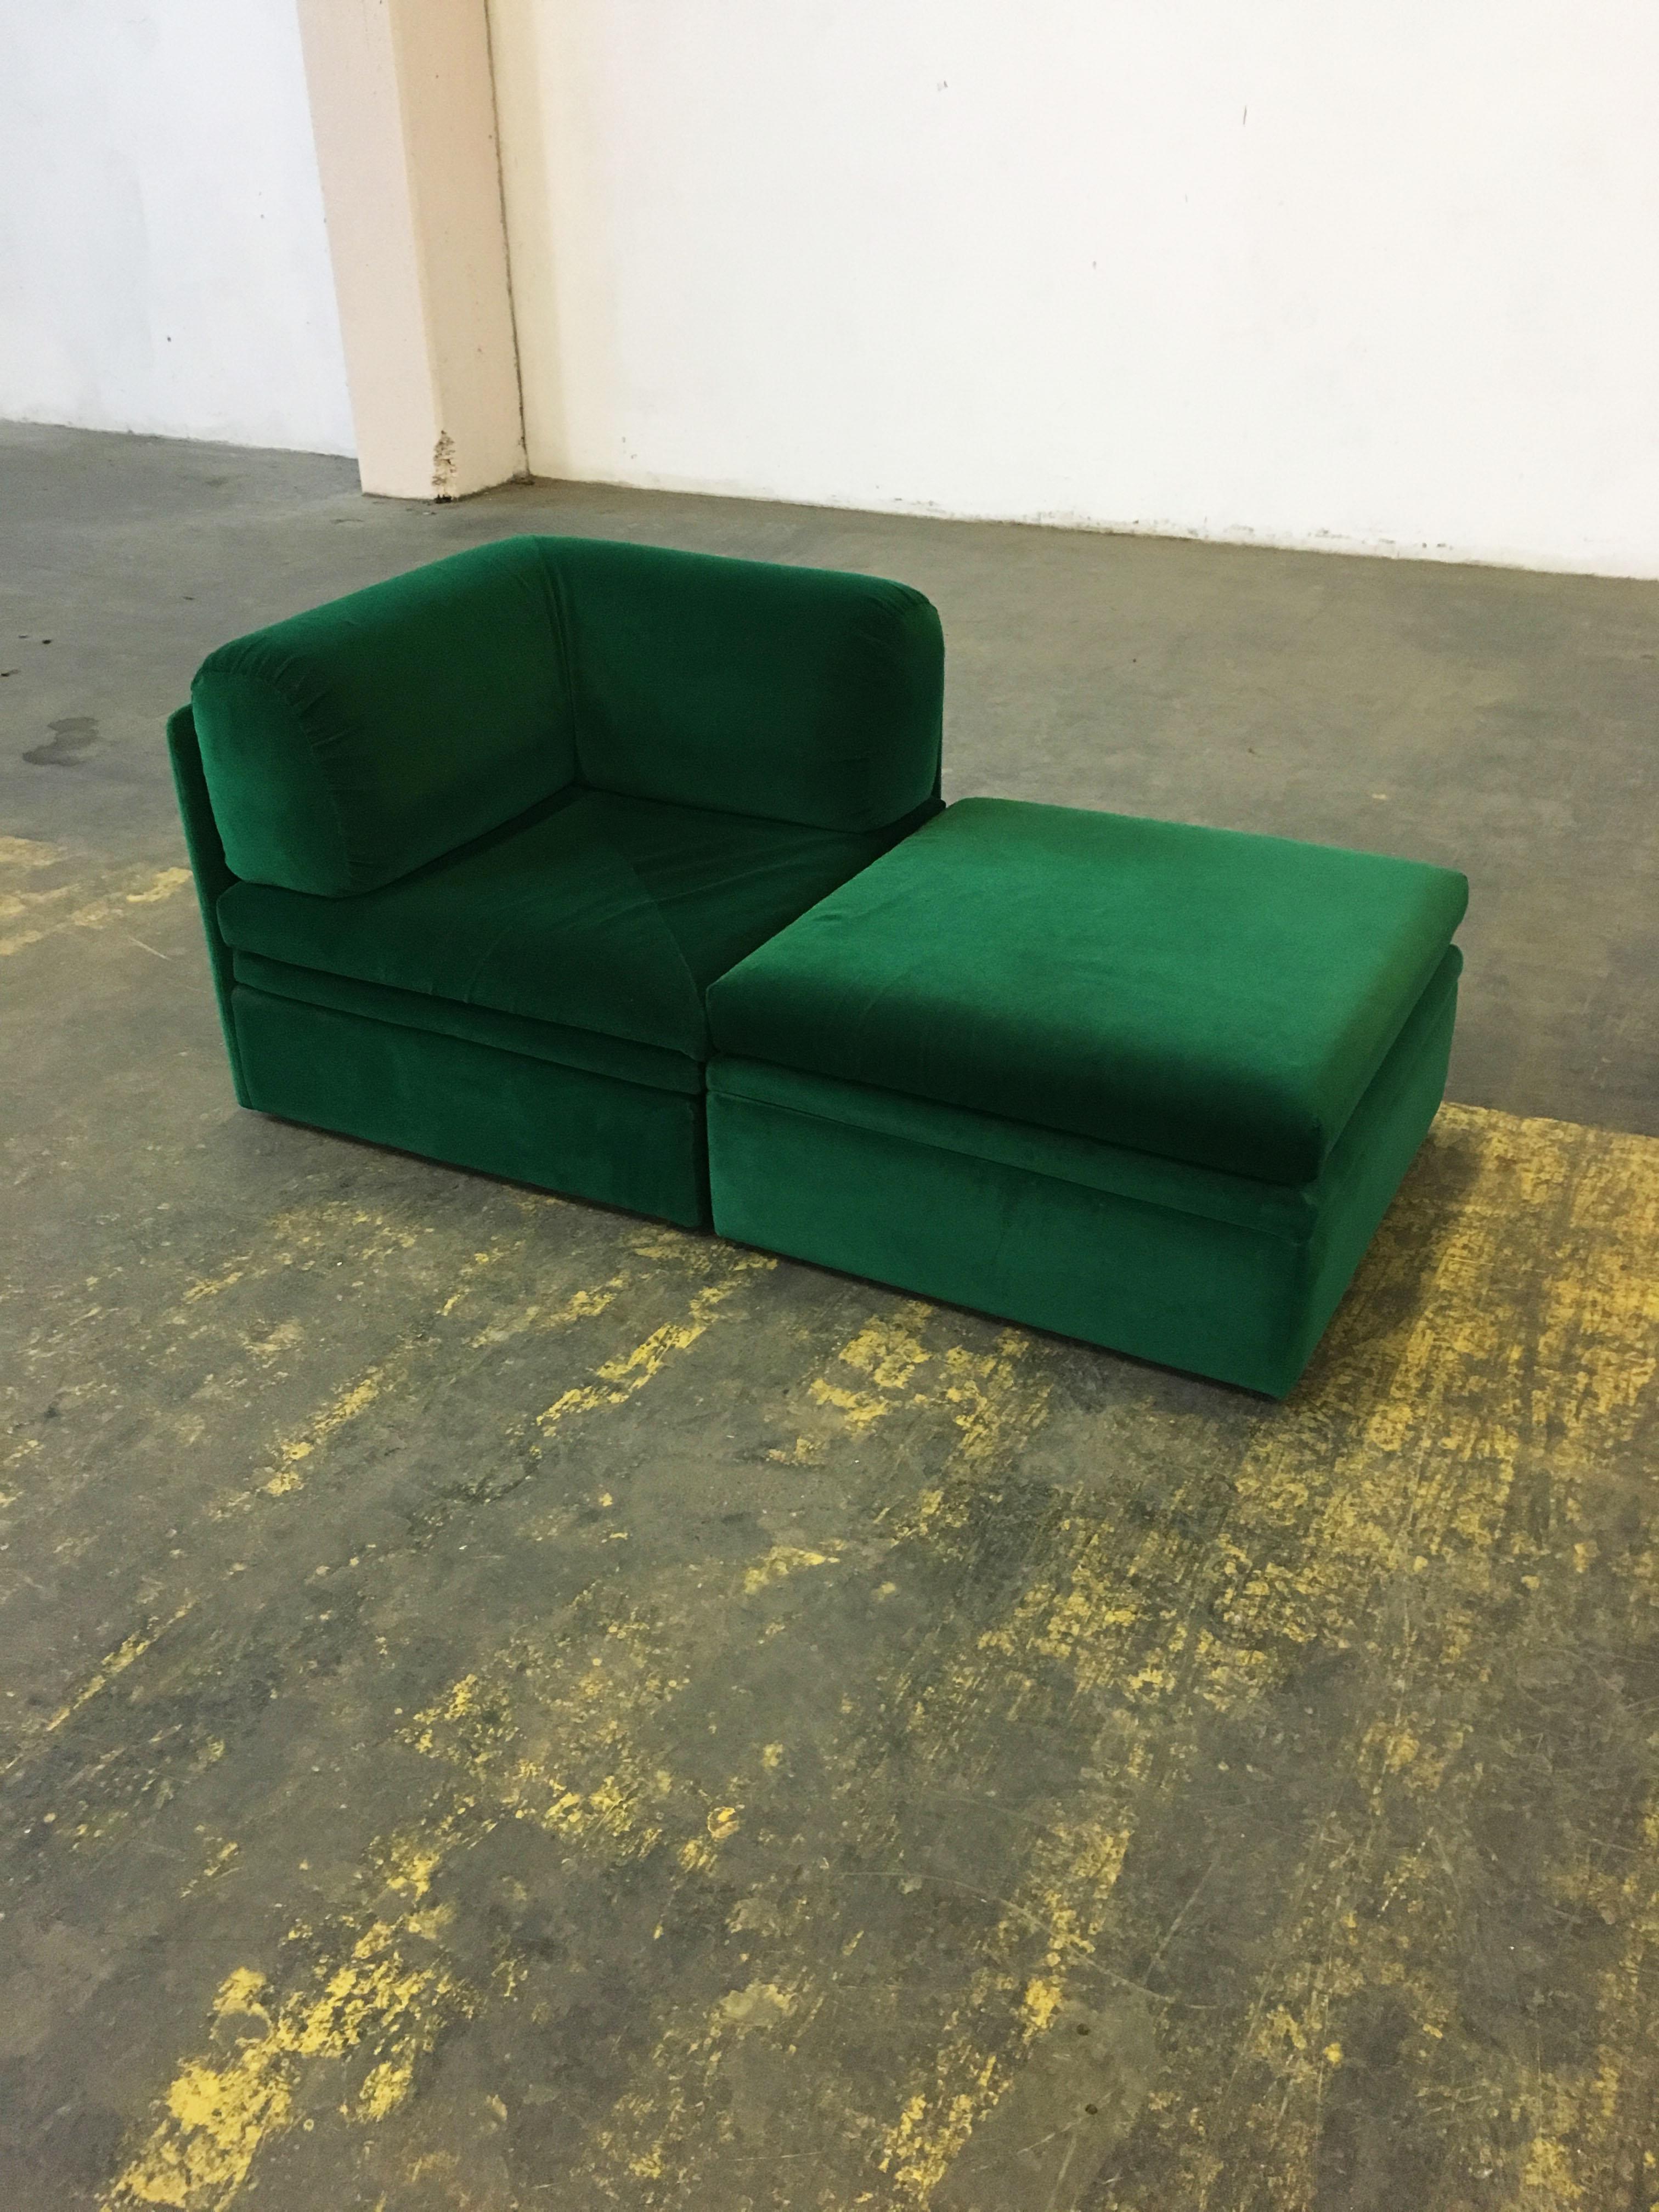 Vintage Altana green velvet daybed setee sofa, Italy, 1970s. A beautiful modern vintage setee sofa in a lovely soft vivid green velvet. The set consists of two sectional elements, one with a backrest, the second unfolds to reveal a storage